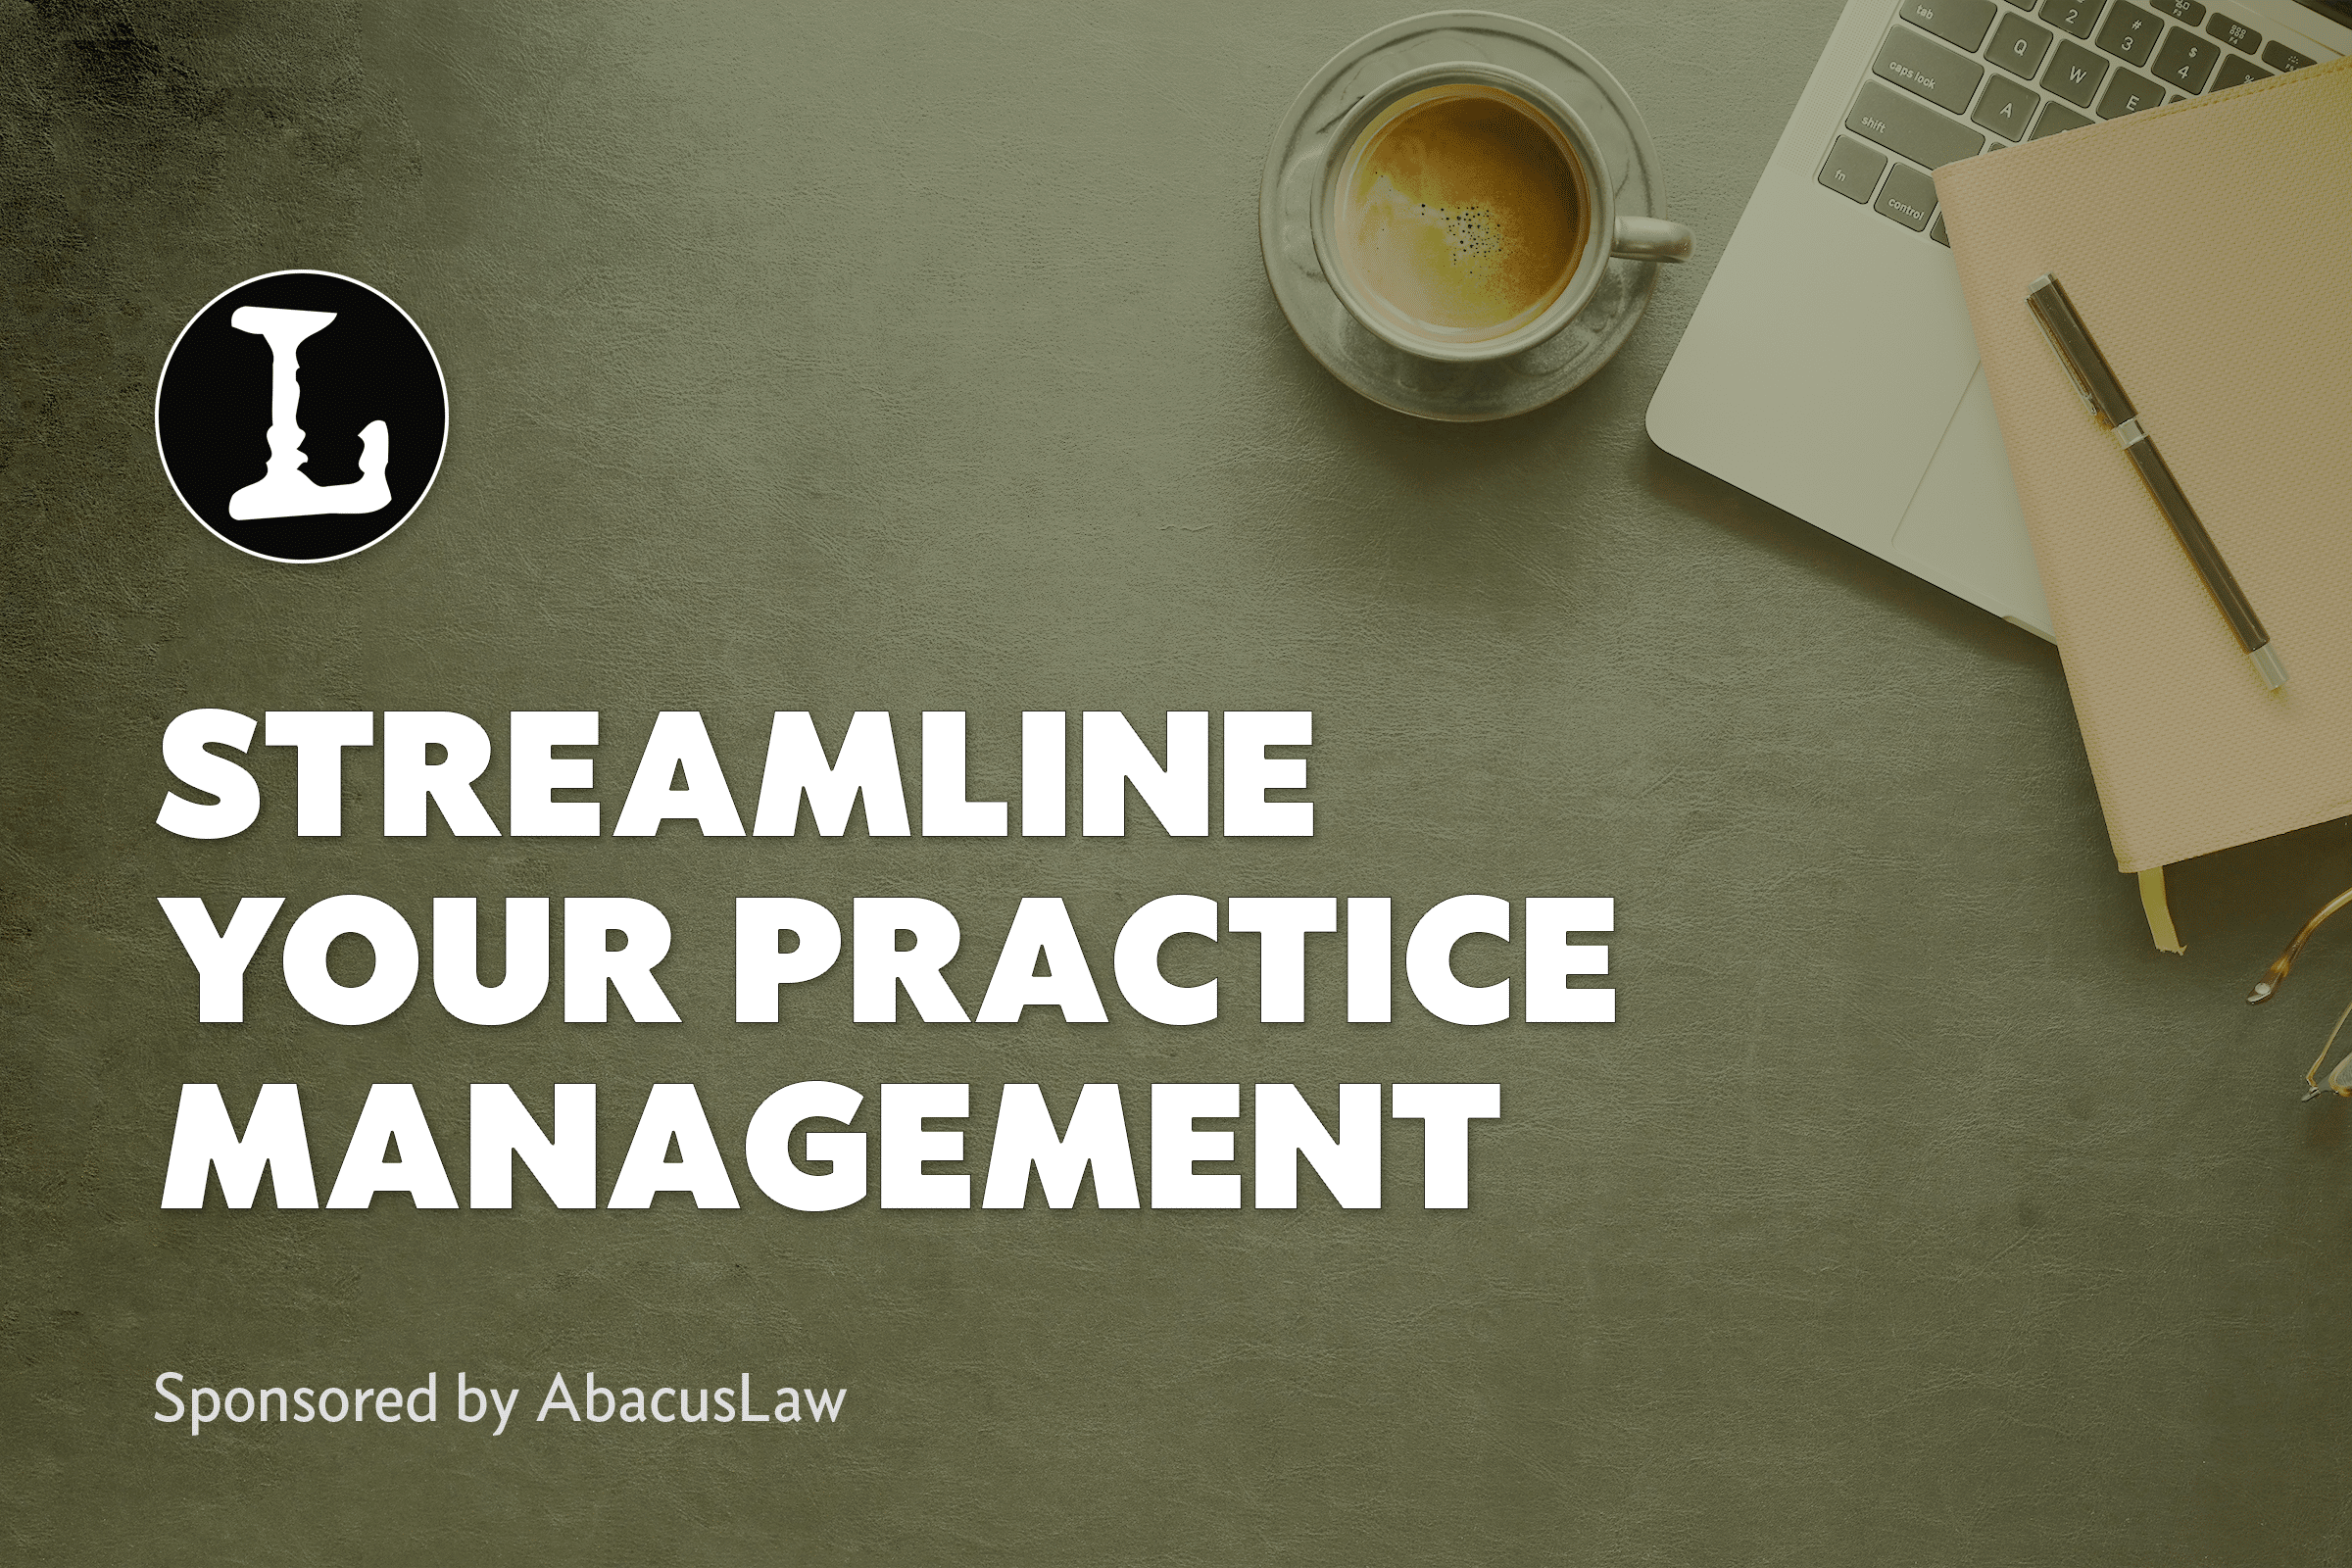 Streamline Practice Management with AbacusLaw PALS featured image